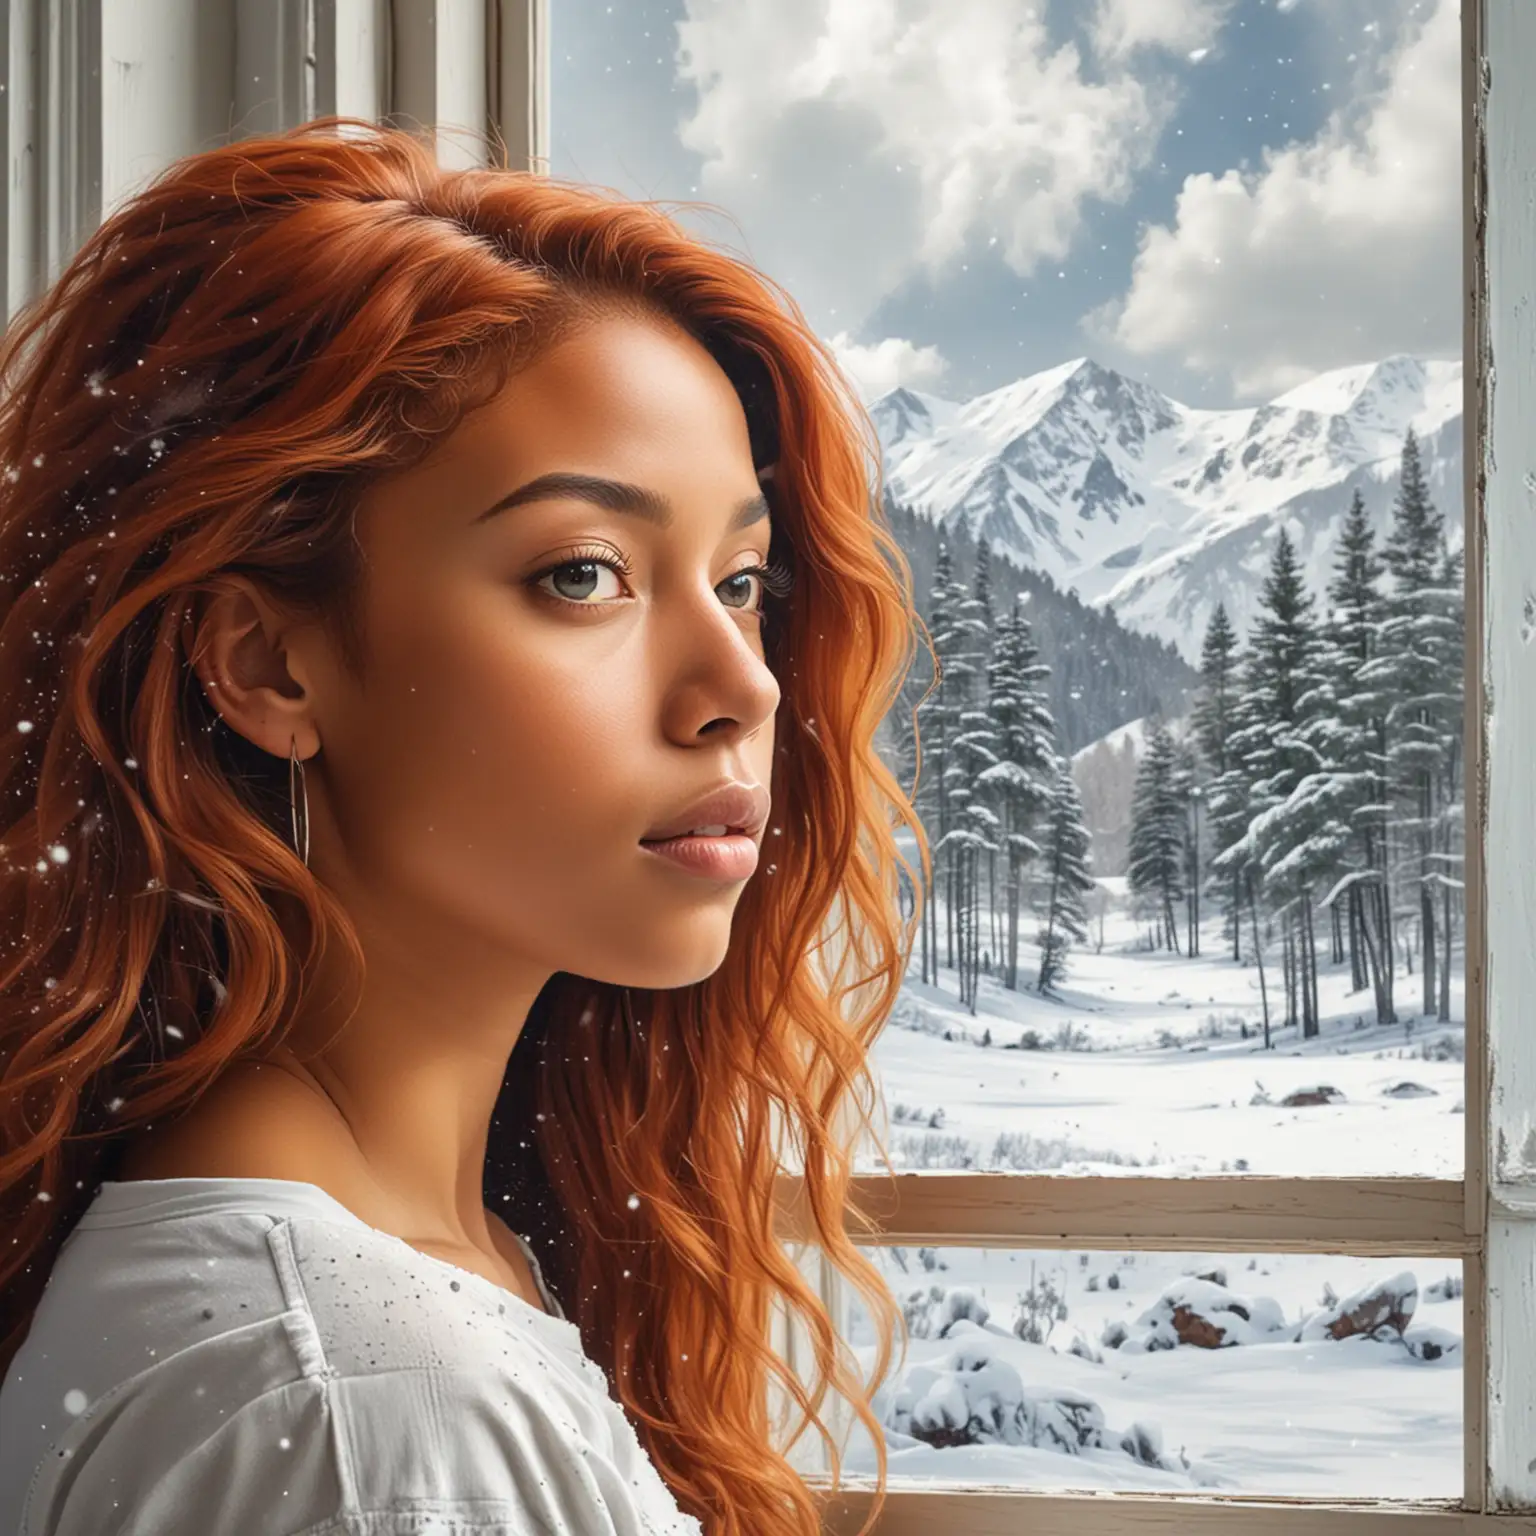 create an abstract Picasso style painting of a young red haired Mulatto Woman looking out of a large picture window at a beautiful snowy landscape


